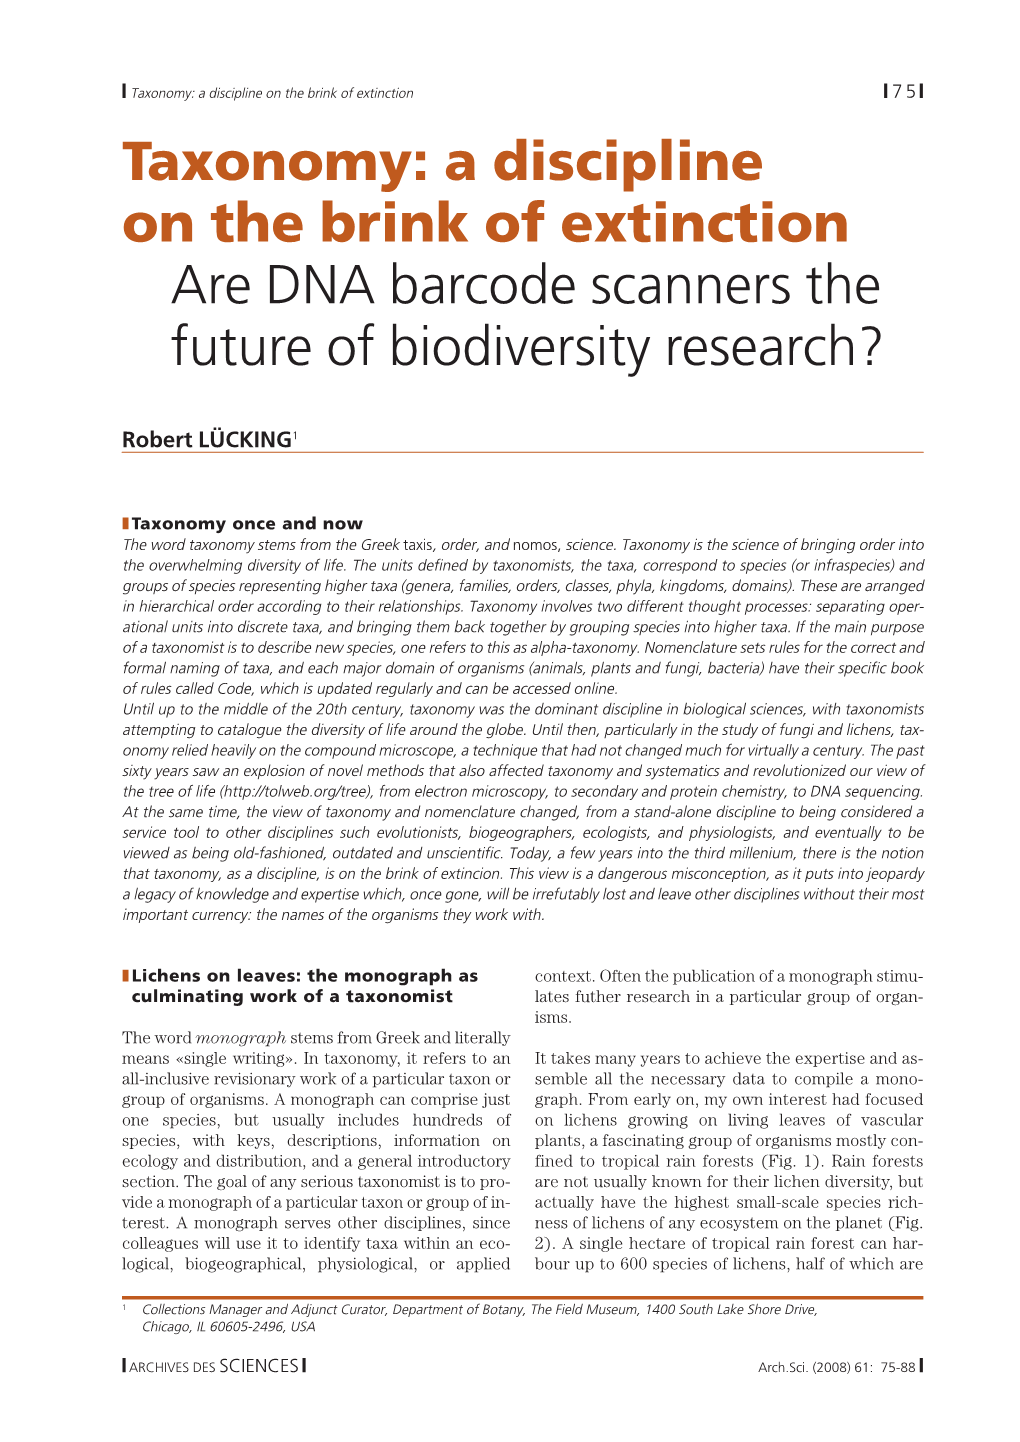 Taxonomy: a Discipline on the Brink of Extinction Are DNA Barcode Scanners the Future of Biodiversity Research?